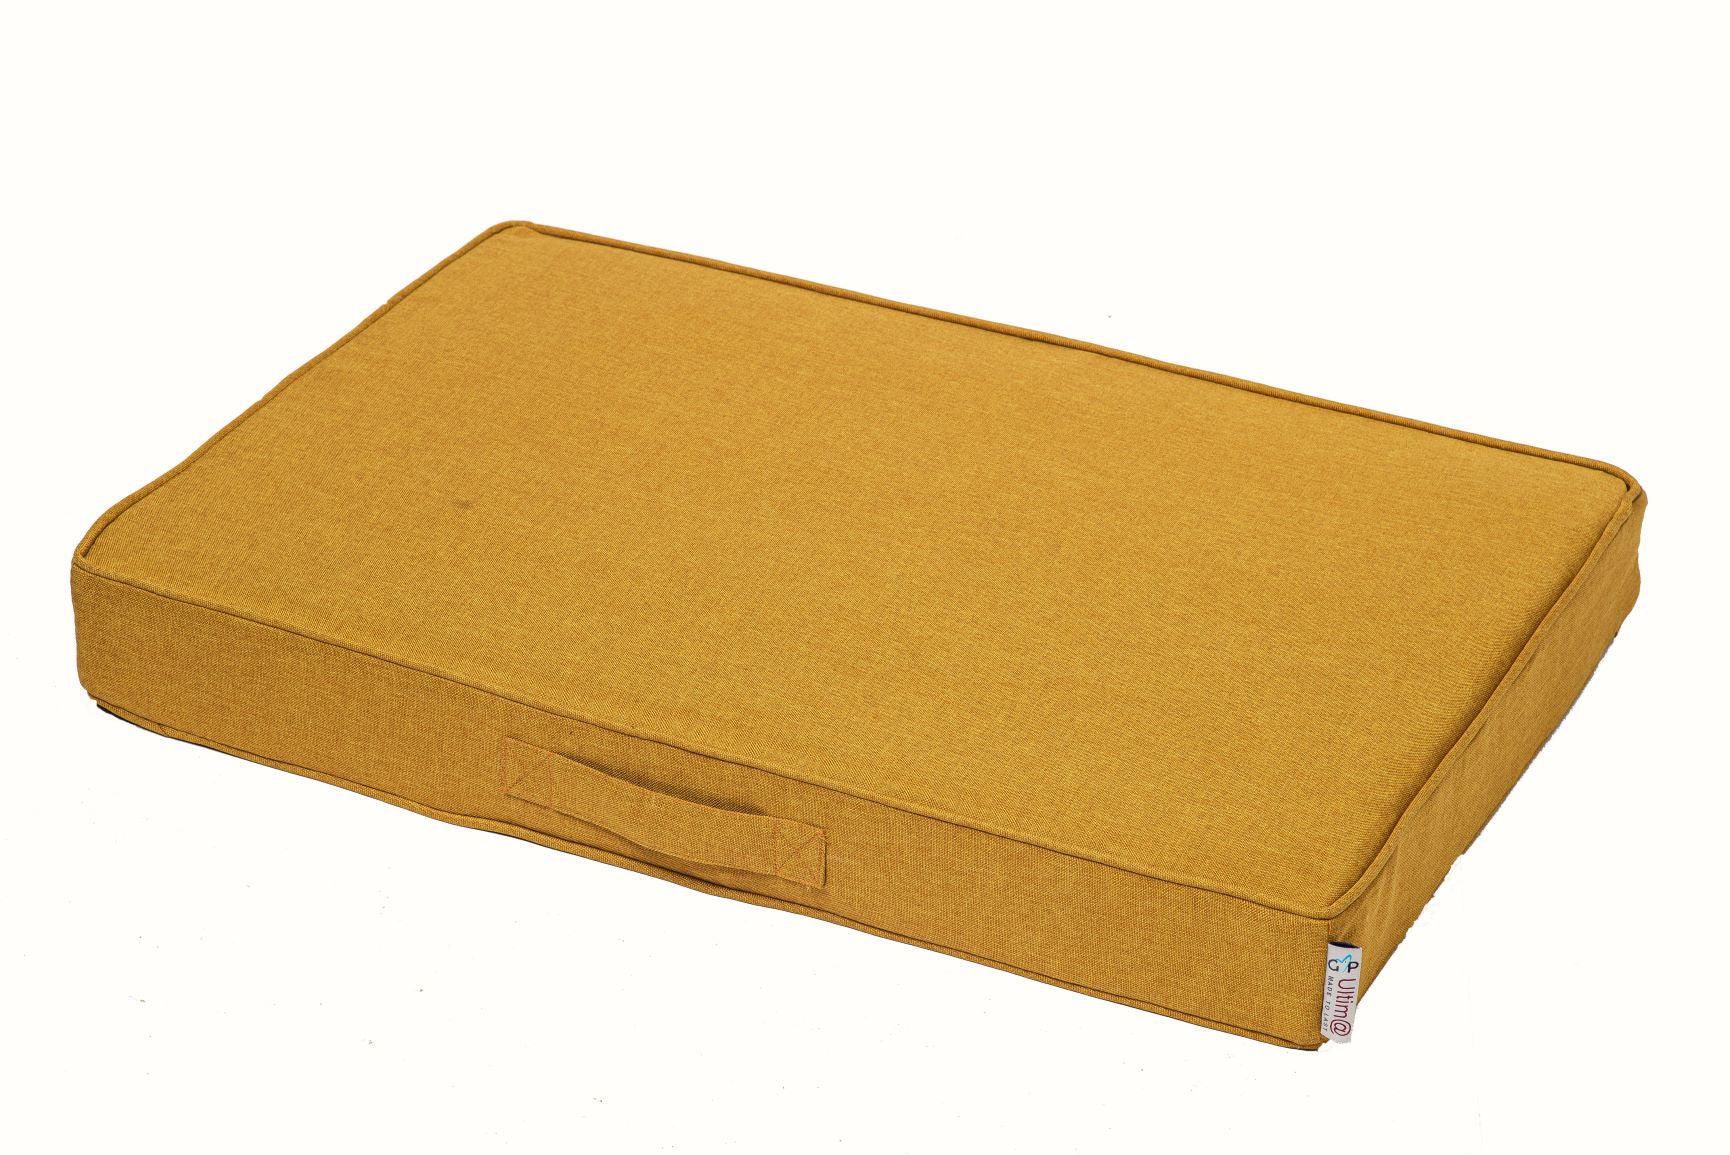 View Memory Foam Ultima Sleeper Cover Mustard Large information